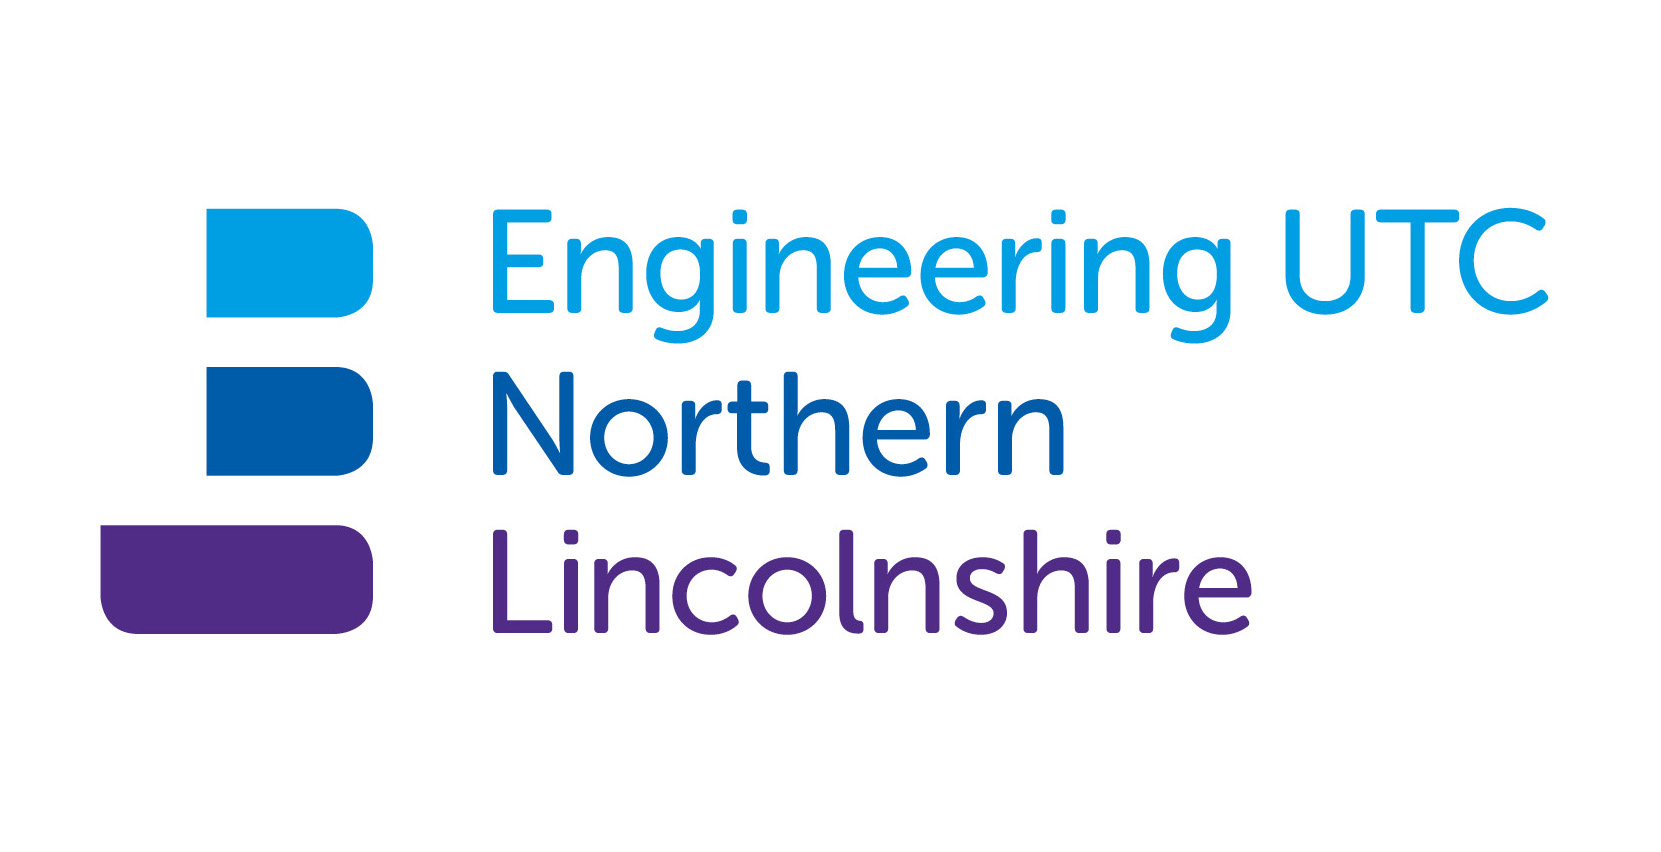 Good Ofsted rating for Engineering UTC Northern Lincolnshire